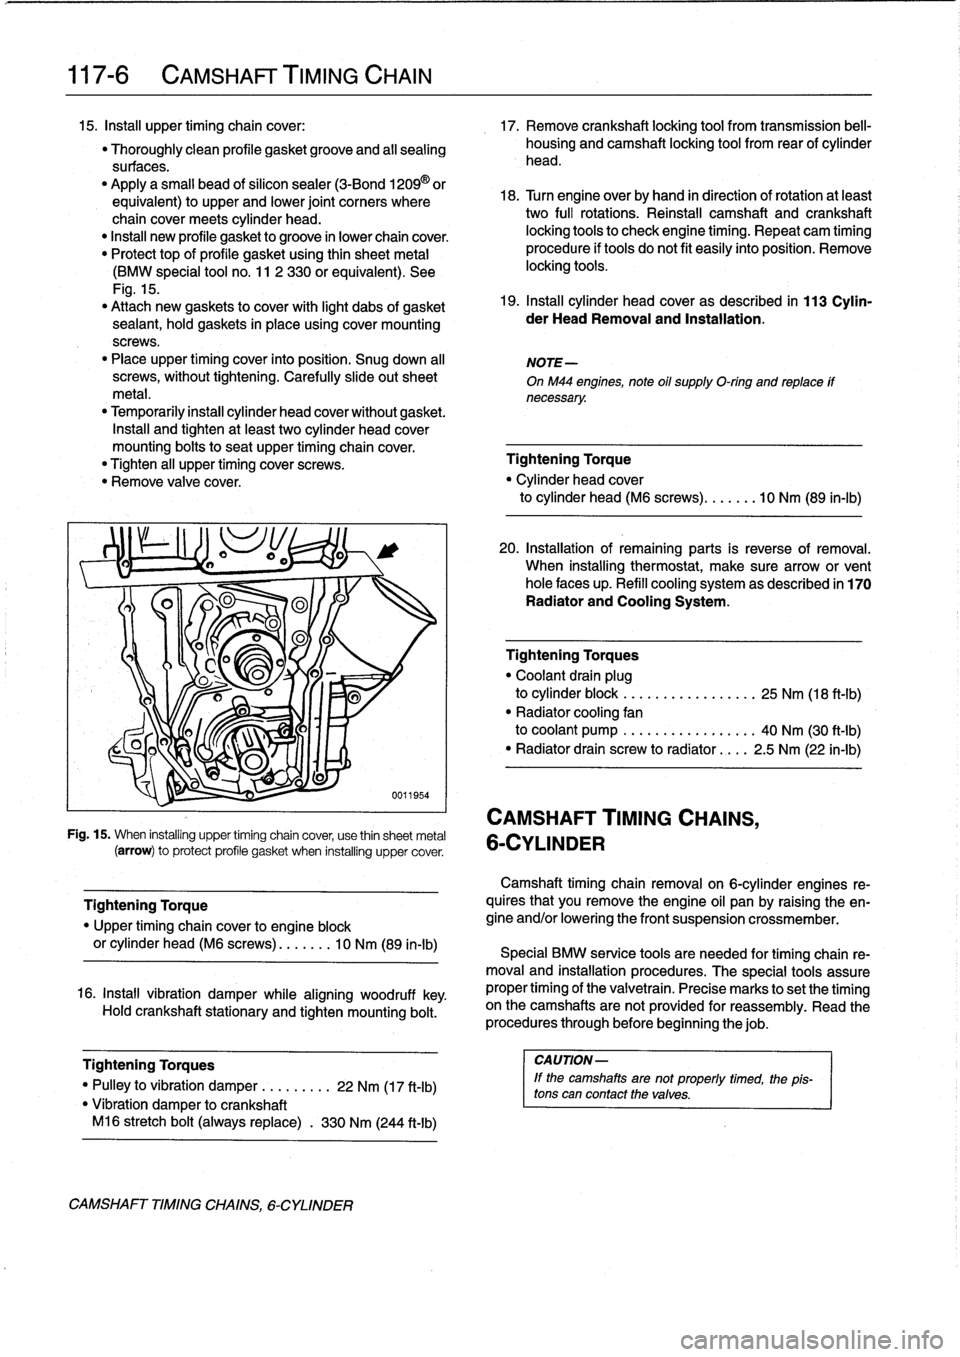 BMW 318i 1998 E36 Workshop Manual 
117-
6

	

CAMSHAFT
TIMING
CHAIN

15
.
Insta¡¡
upper
timing
chaincover
:

	

17
.
Remove
crankshaft
locking
tool
from
transmission
bell-

"
Thoroughly
clean
profile
gasketgroove
and
all
sealing

	
